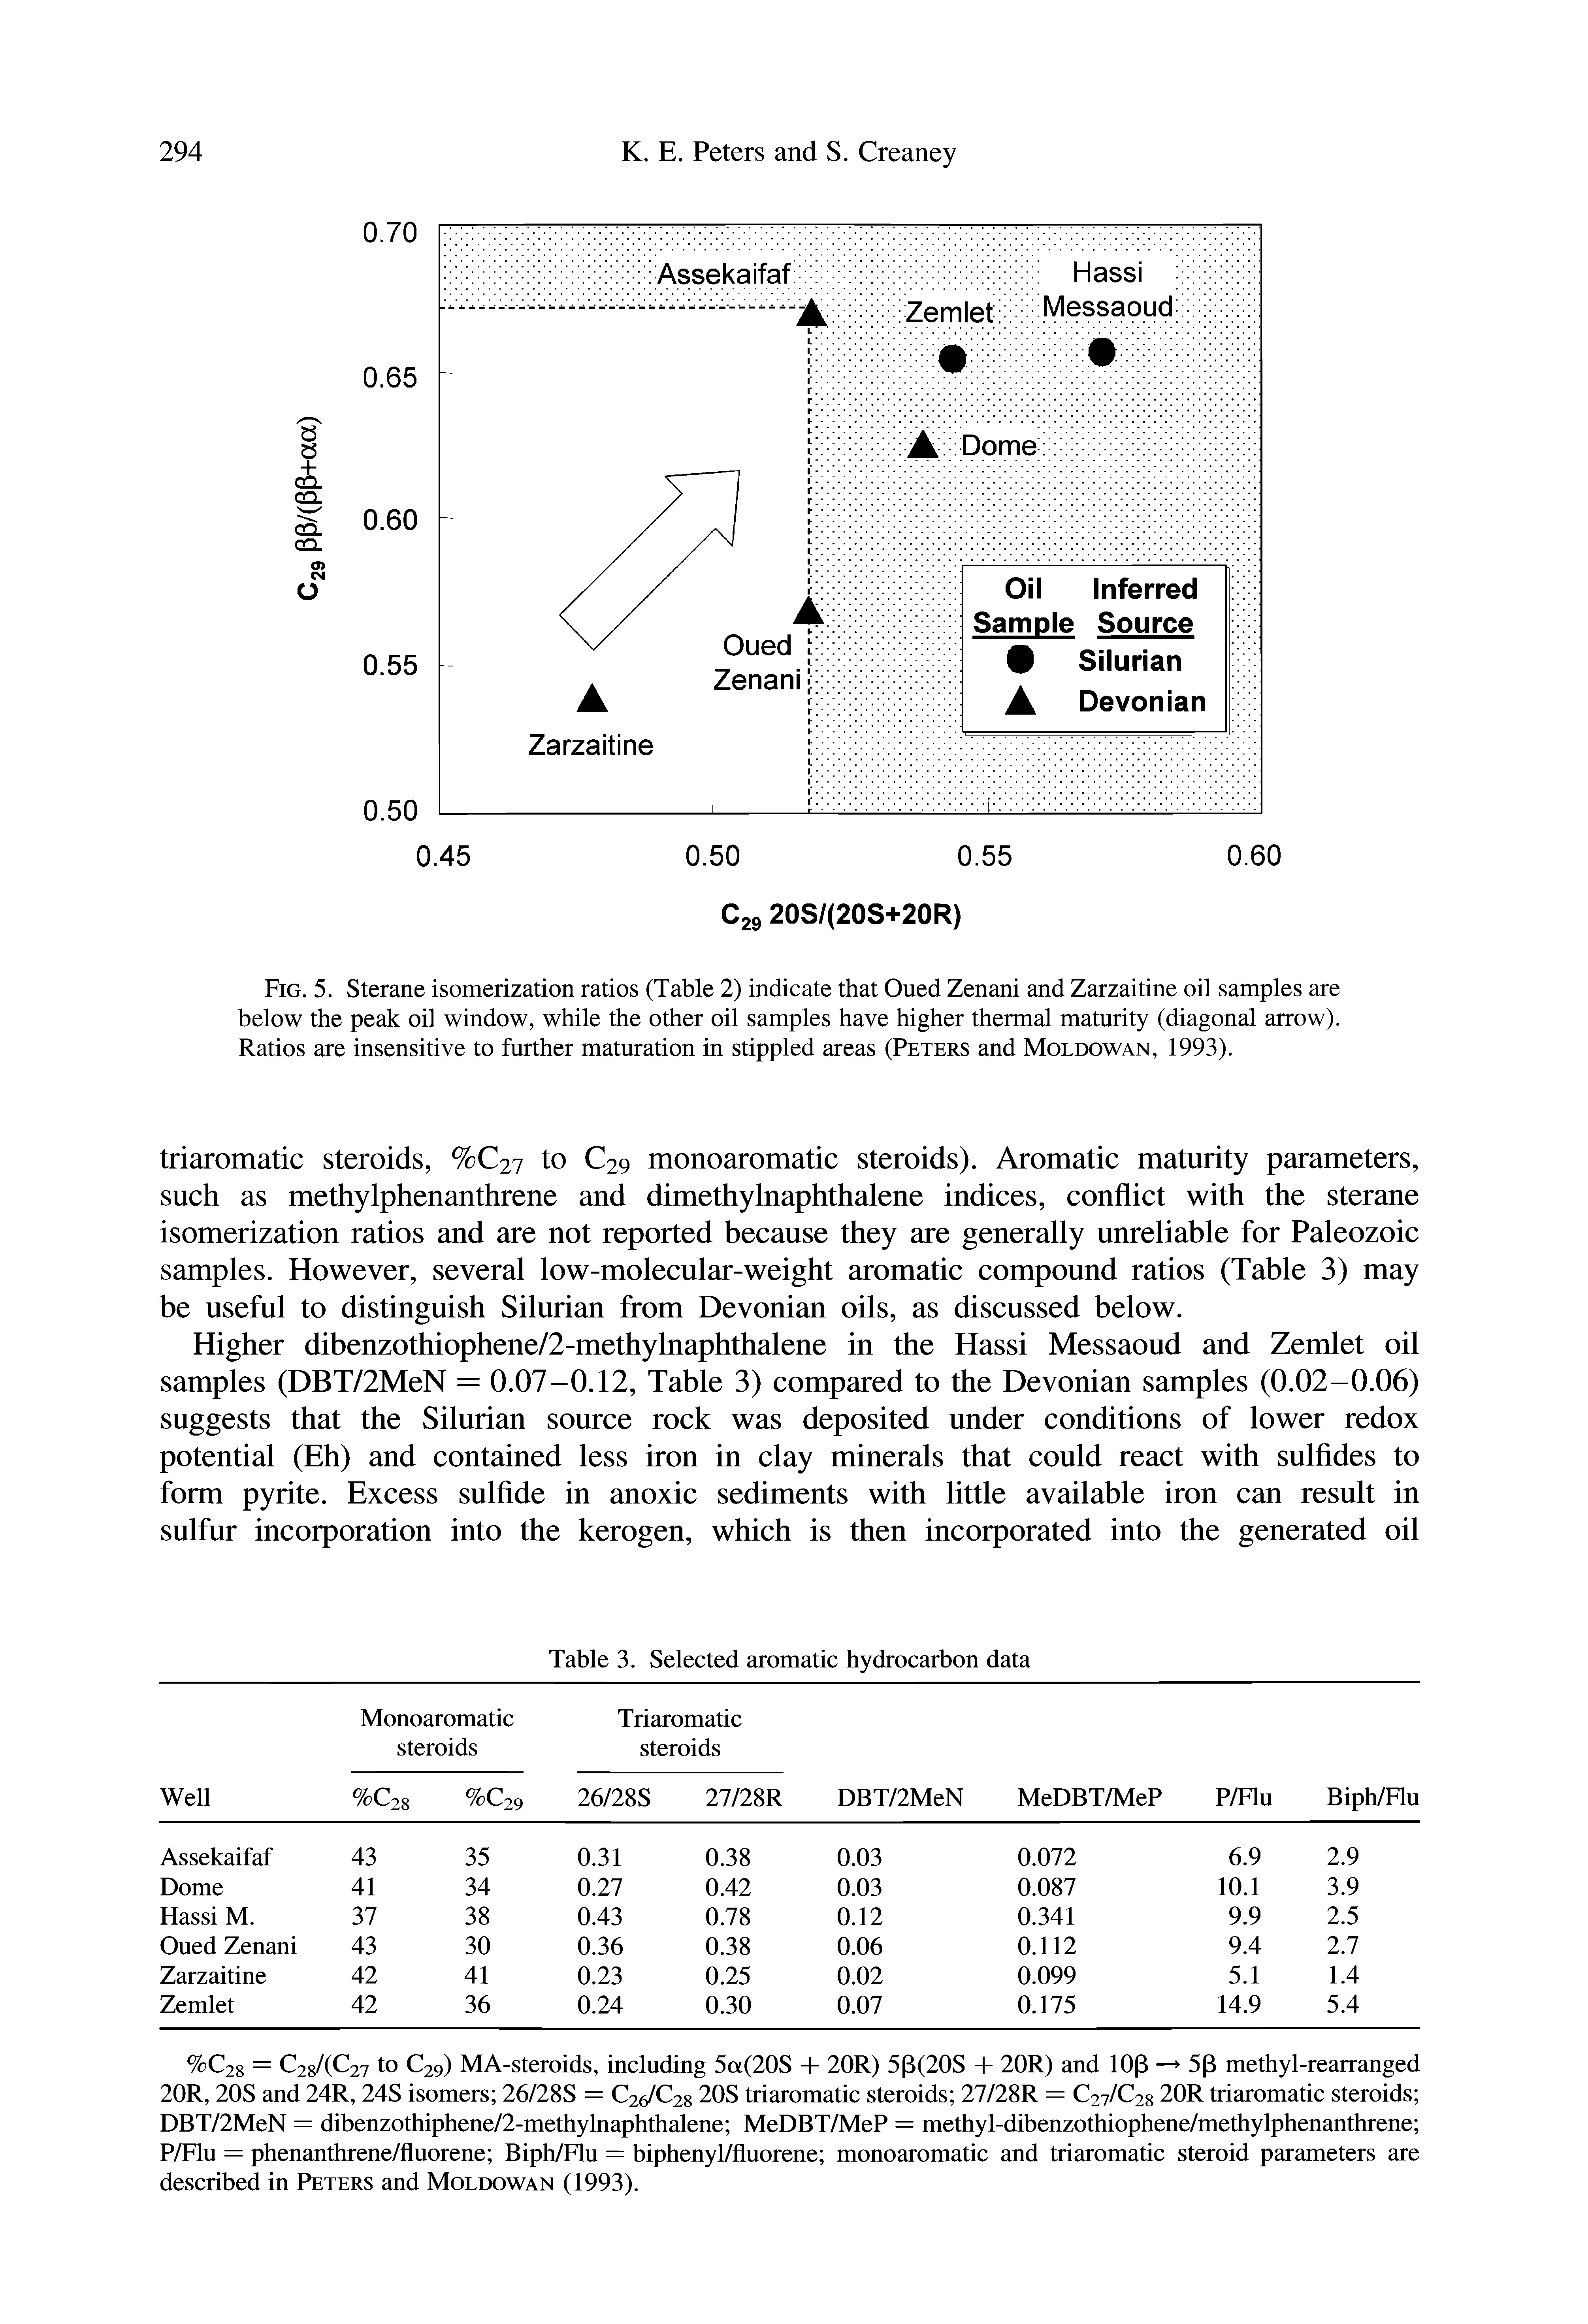 Fig. 5. Sterane isomerization ratios (Table 2) indicate that Oued Zenani and Zarzaitine oil samples are below the peak oil window, while the other oil samples have higher thermal maturity (diagonal arrow). Ratios are insensitive to further maturation in stippled areas (Peters and Moldowan, 1993).